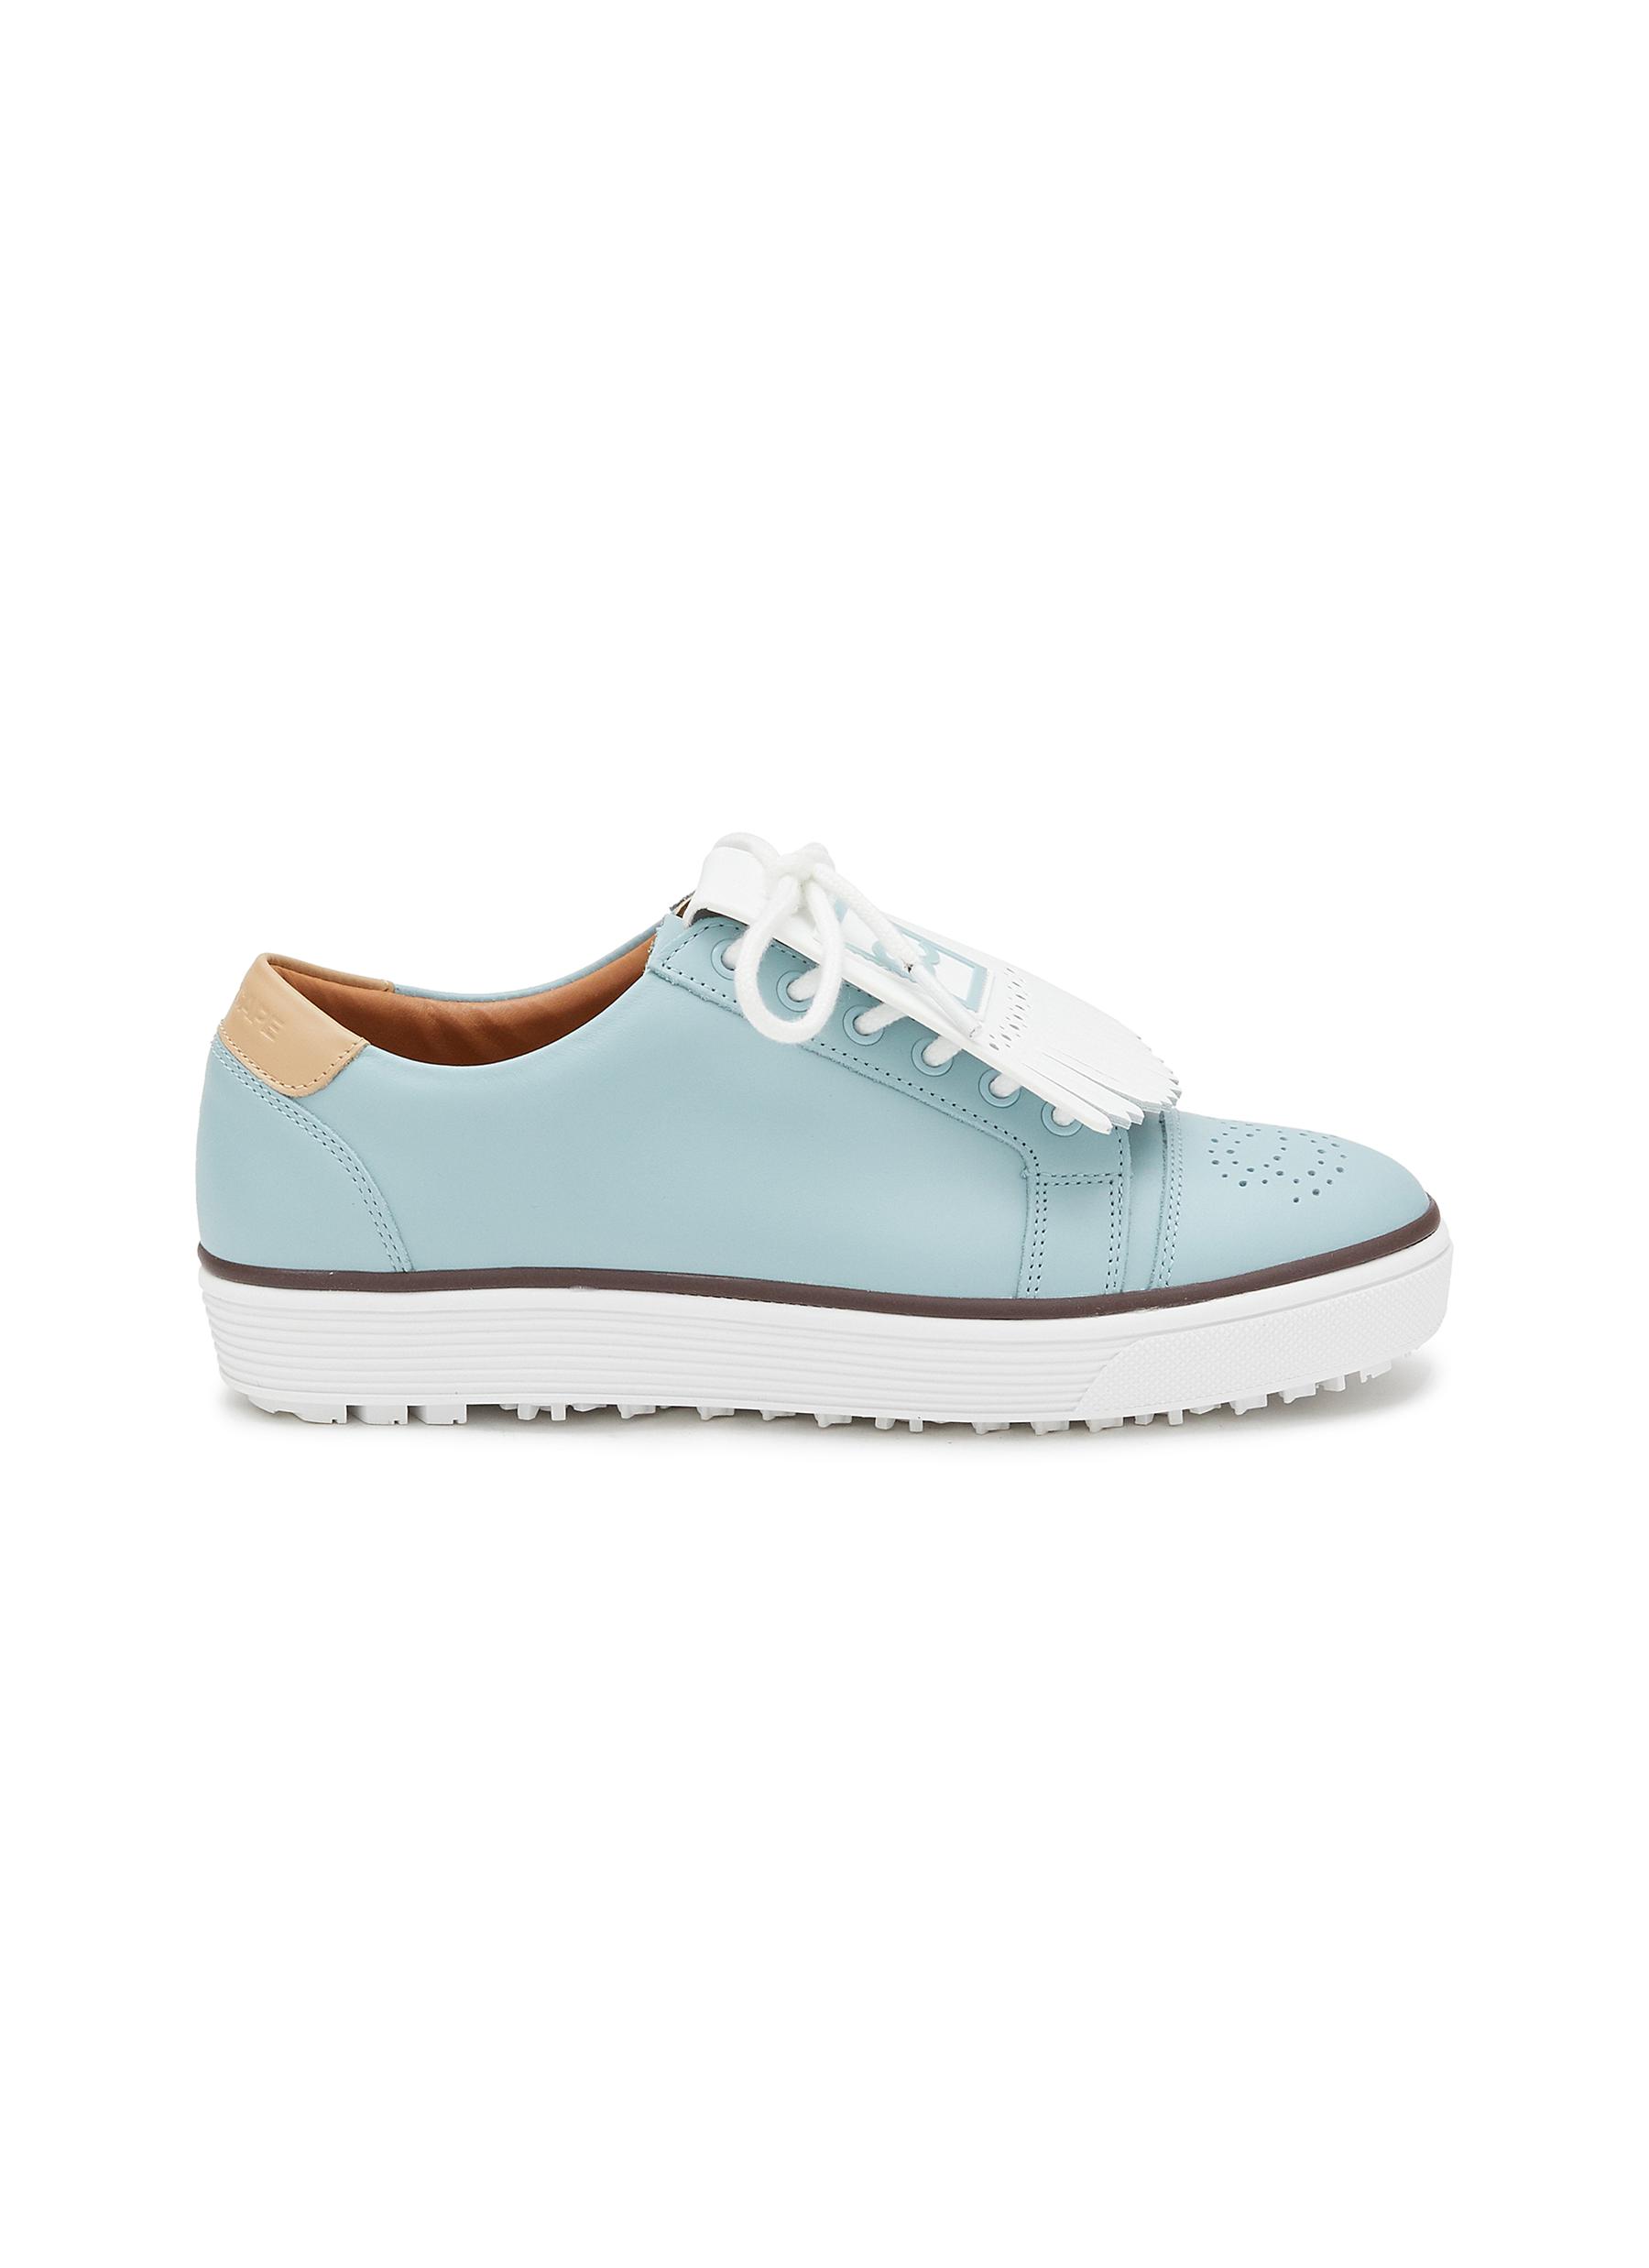 Southcape Removable Tassels Leather Sneakers In Blue